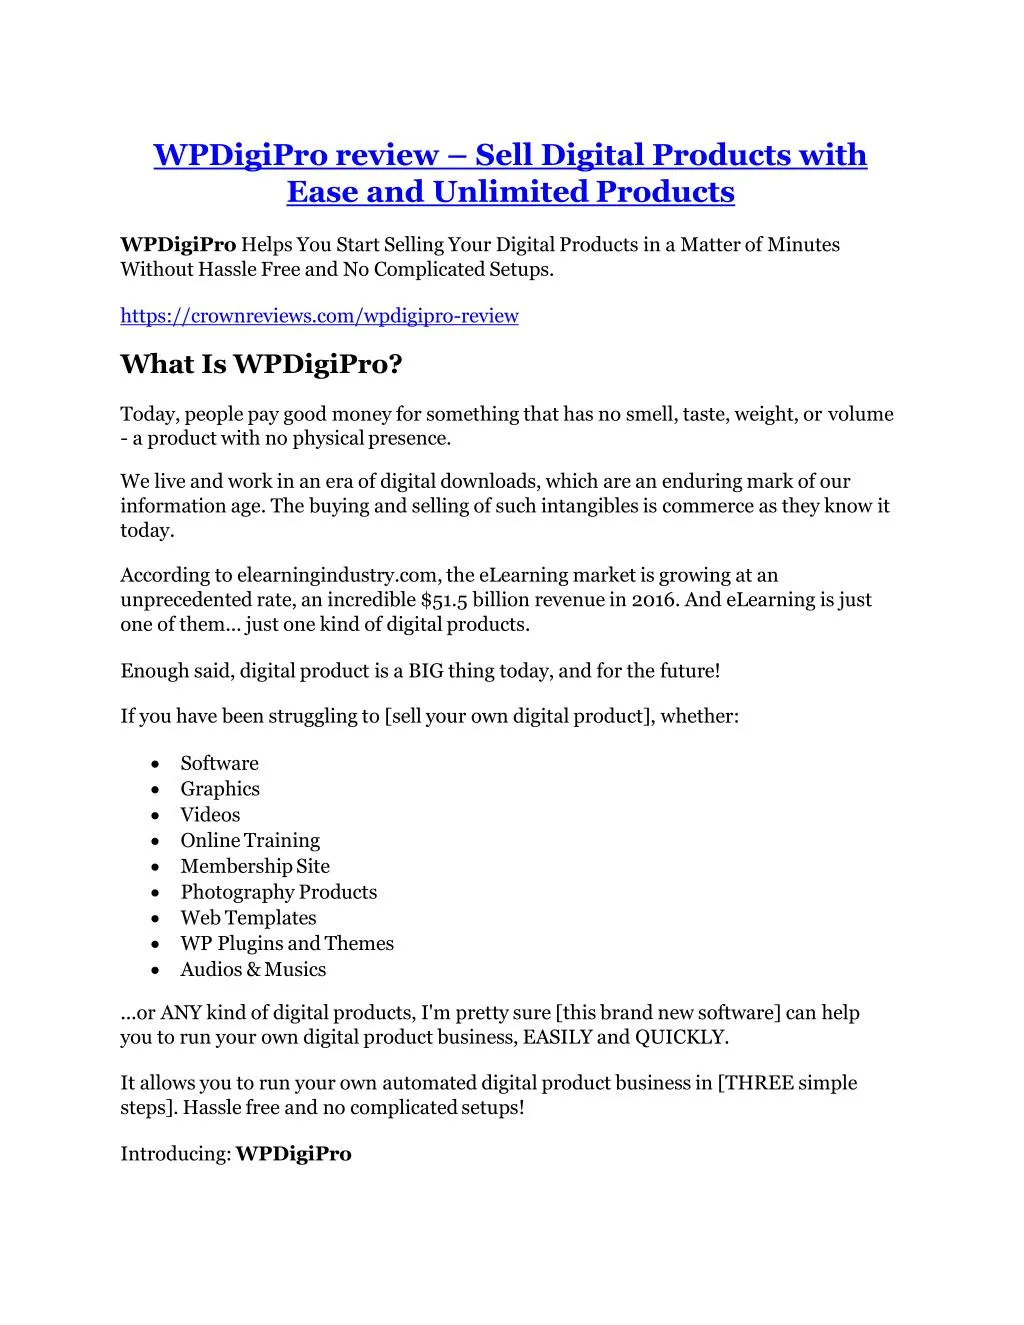 wpdigipro review sell digital products with ease